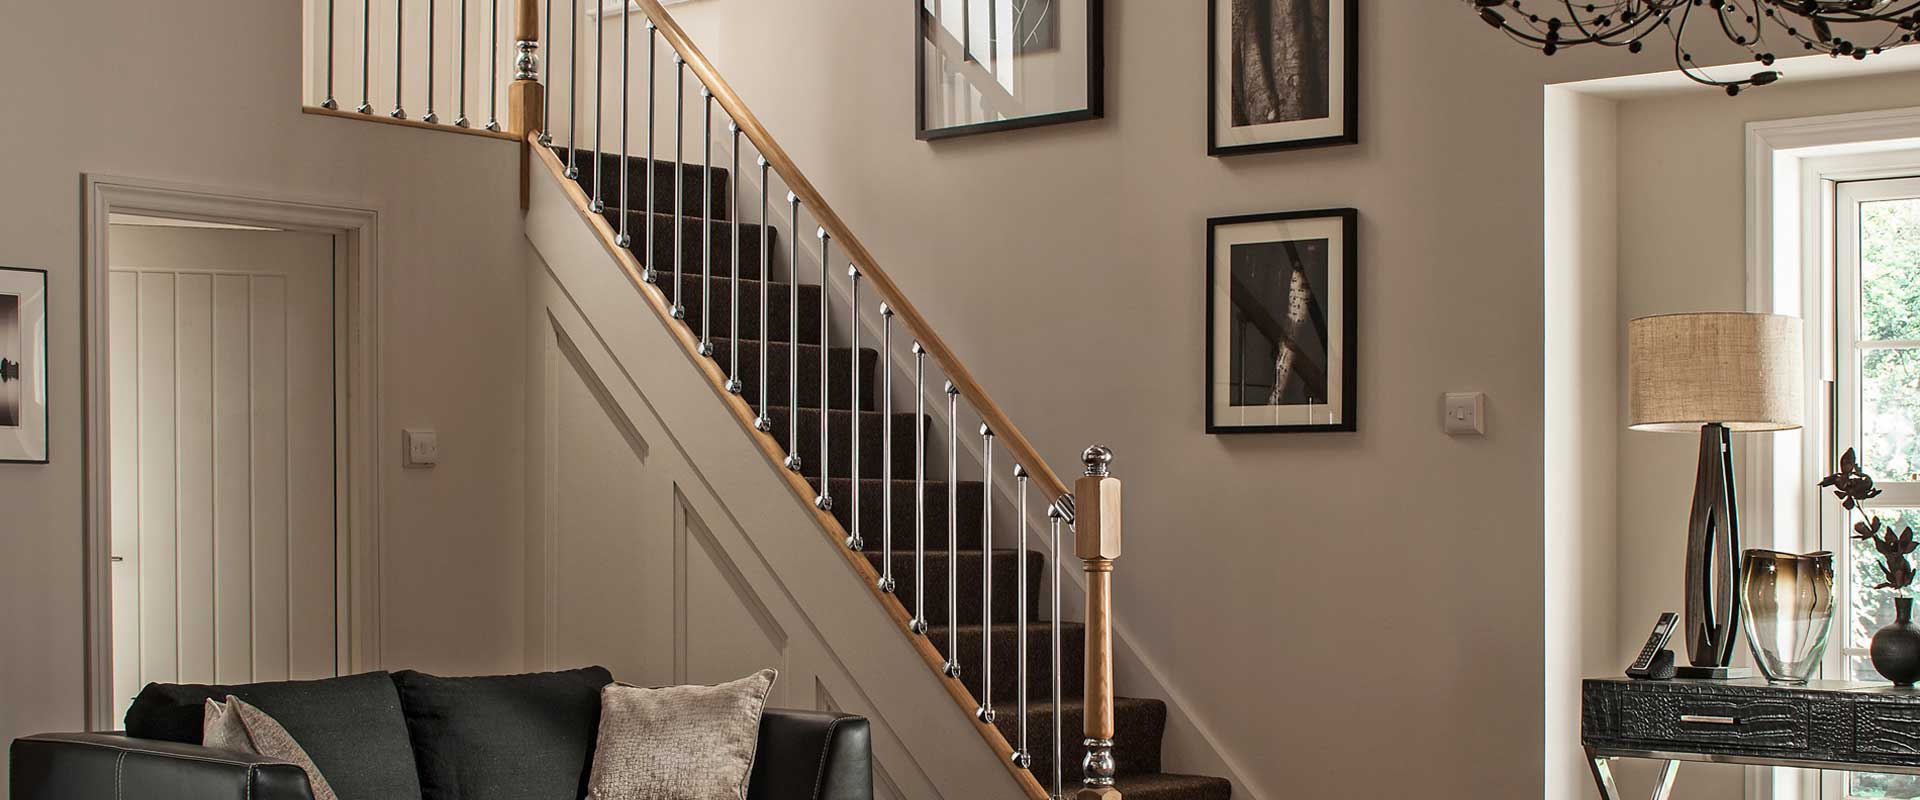 Design & installation of staircases in Lytham & Lancashire